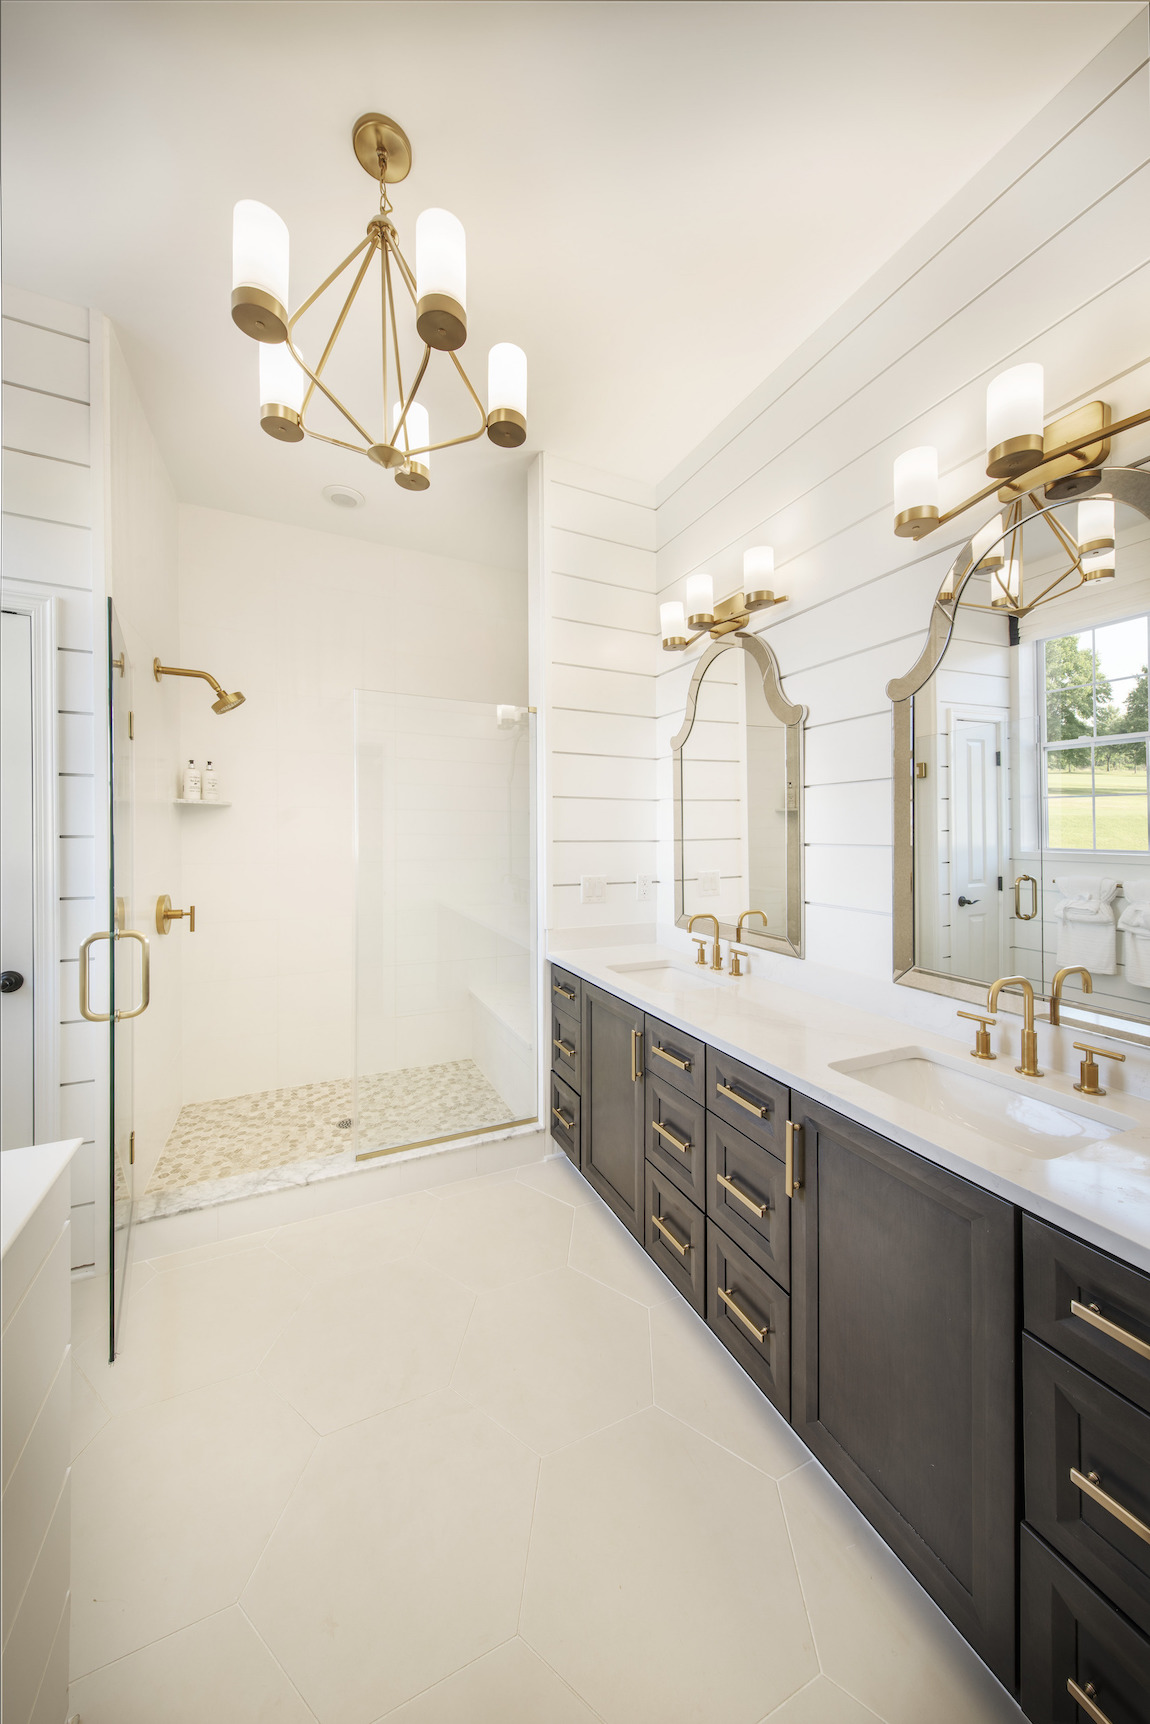 Modern bathroom with shiplap siding & gold accents.